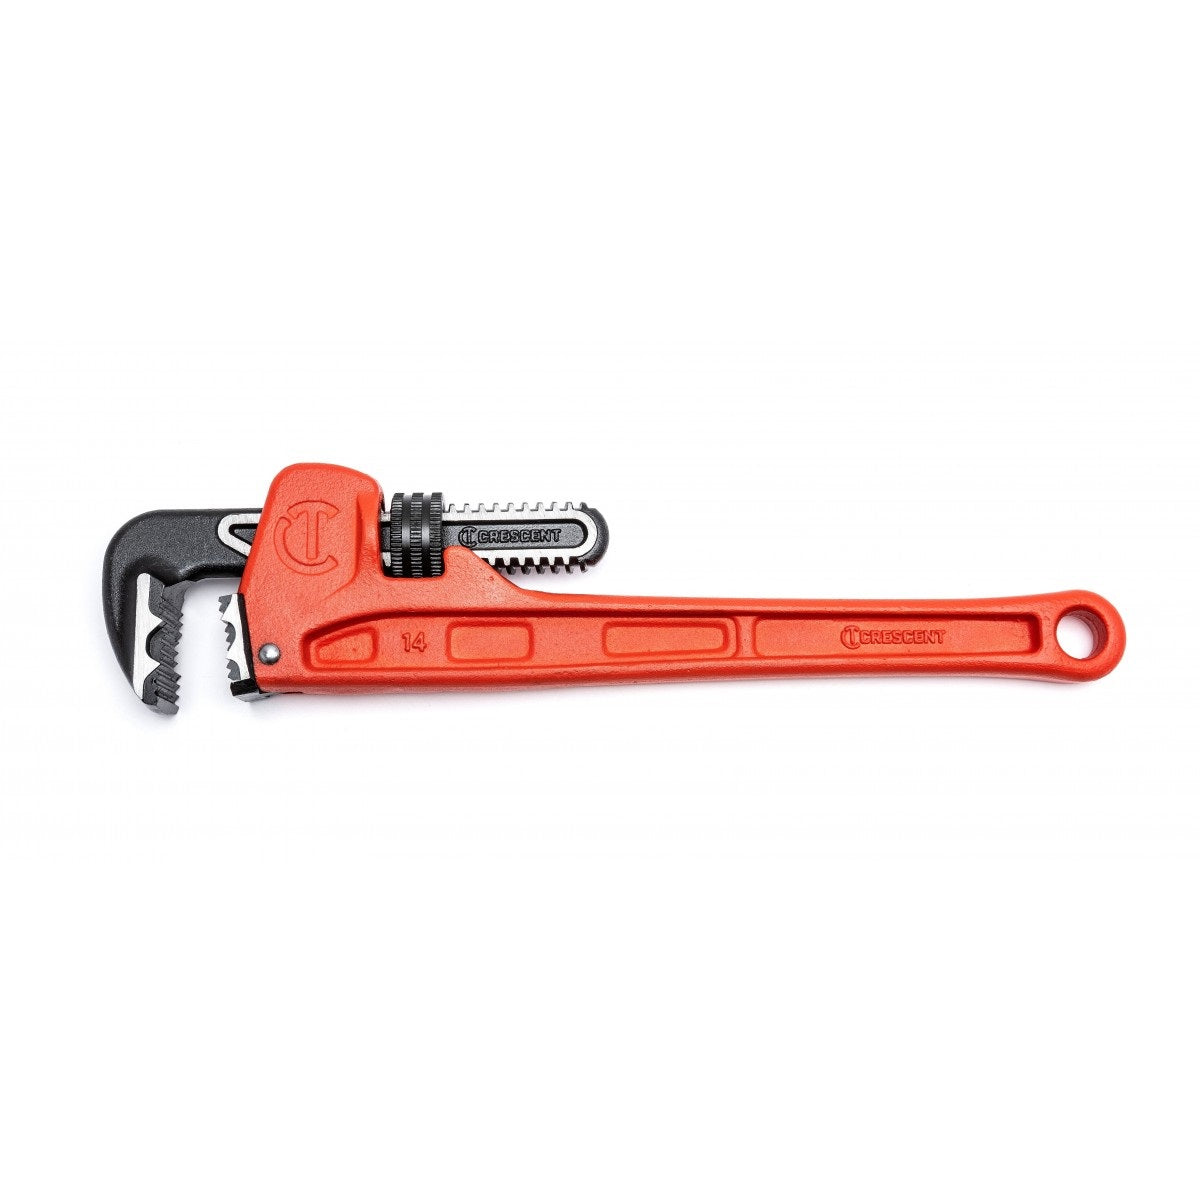 Crescent CIPW14 K9 Jaw Pipe Wrench, Cast Iron